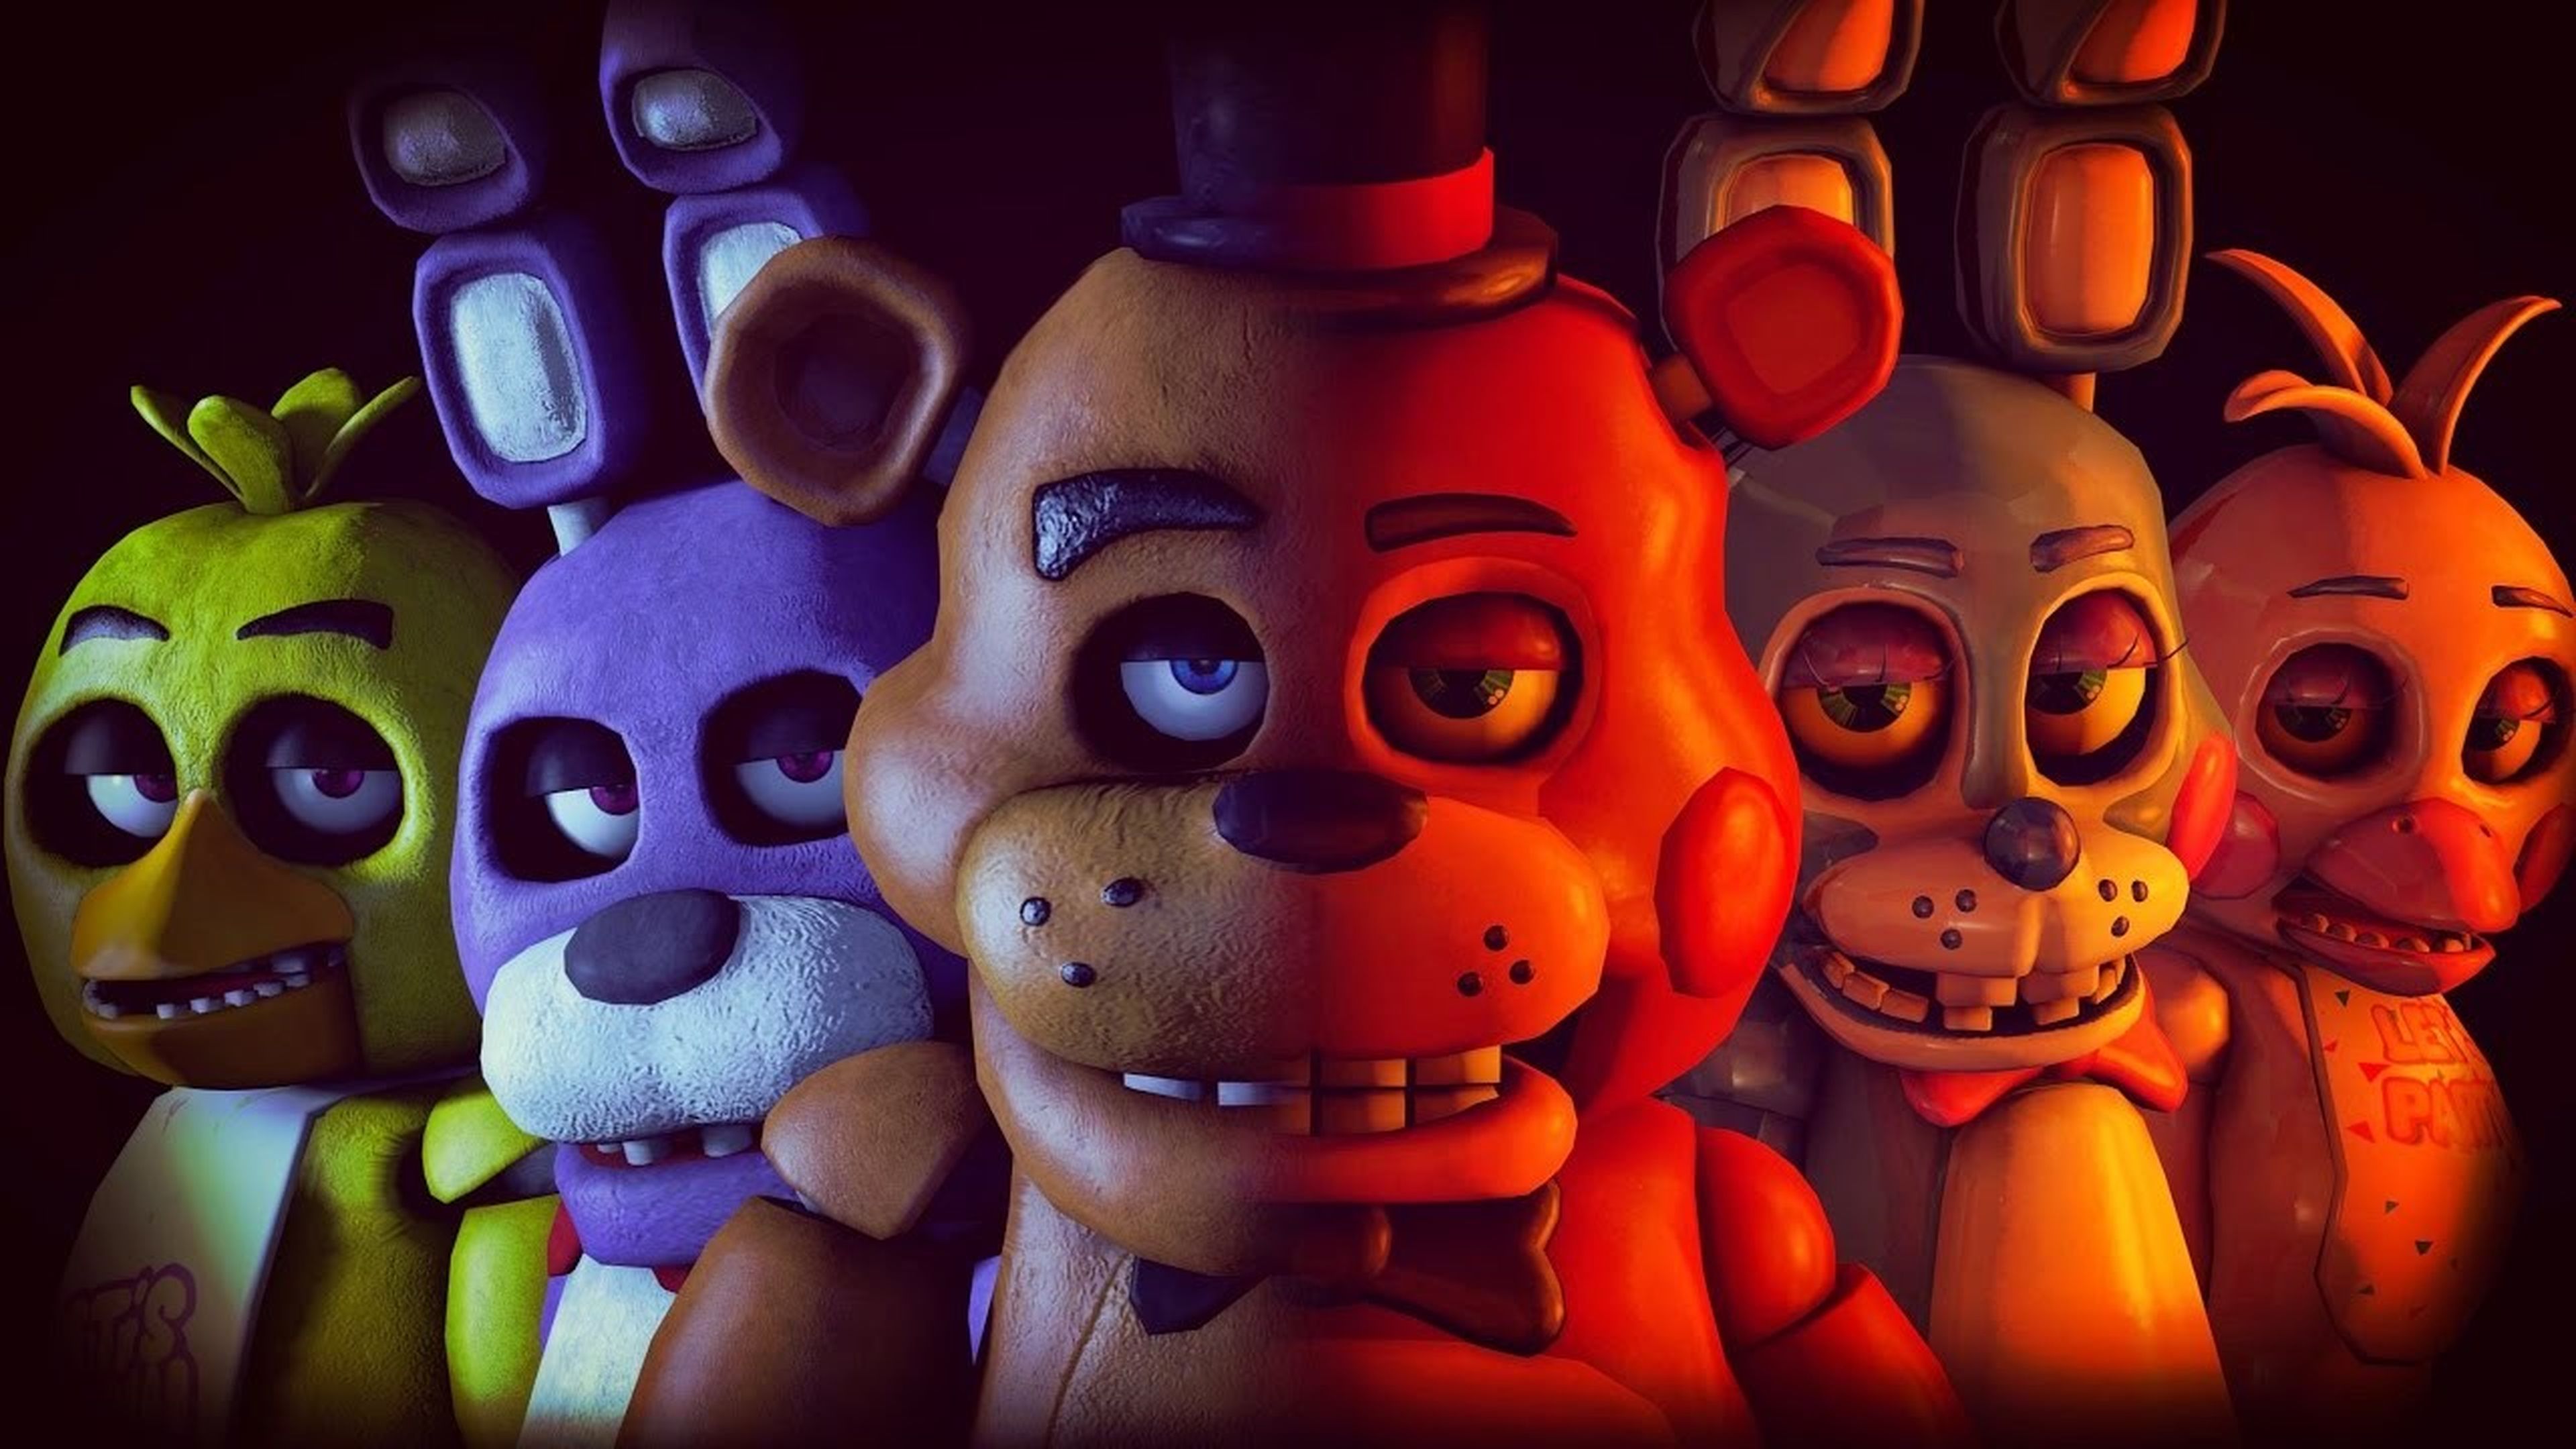 Five Night’s at Freddy’s